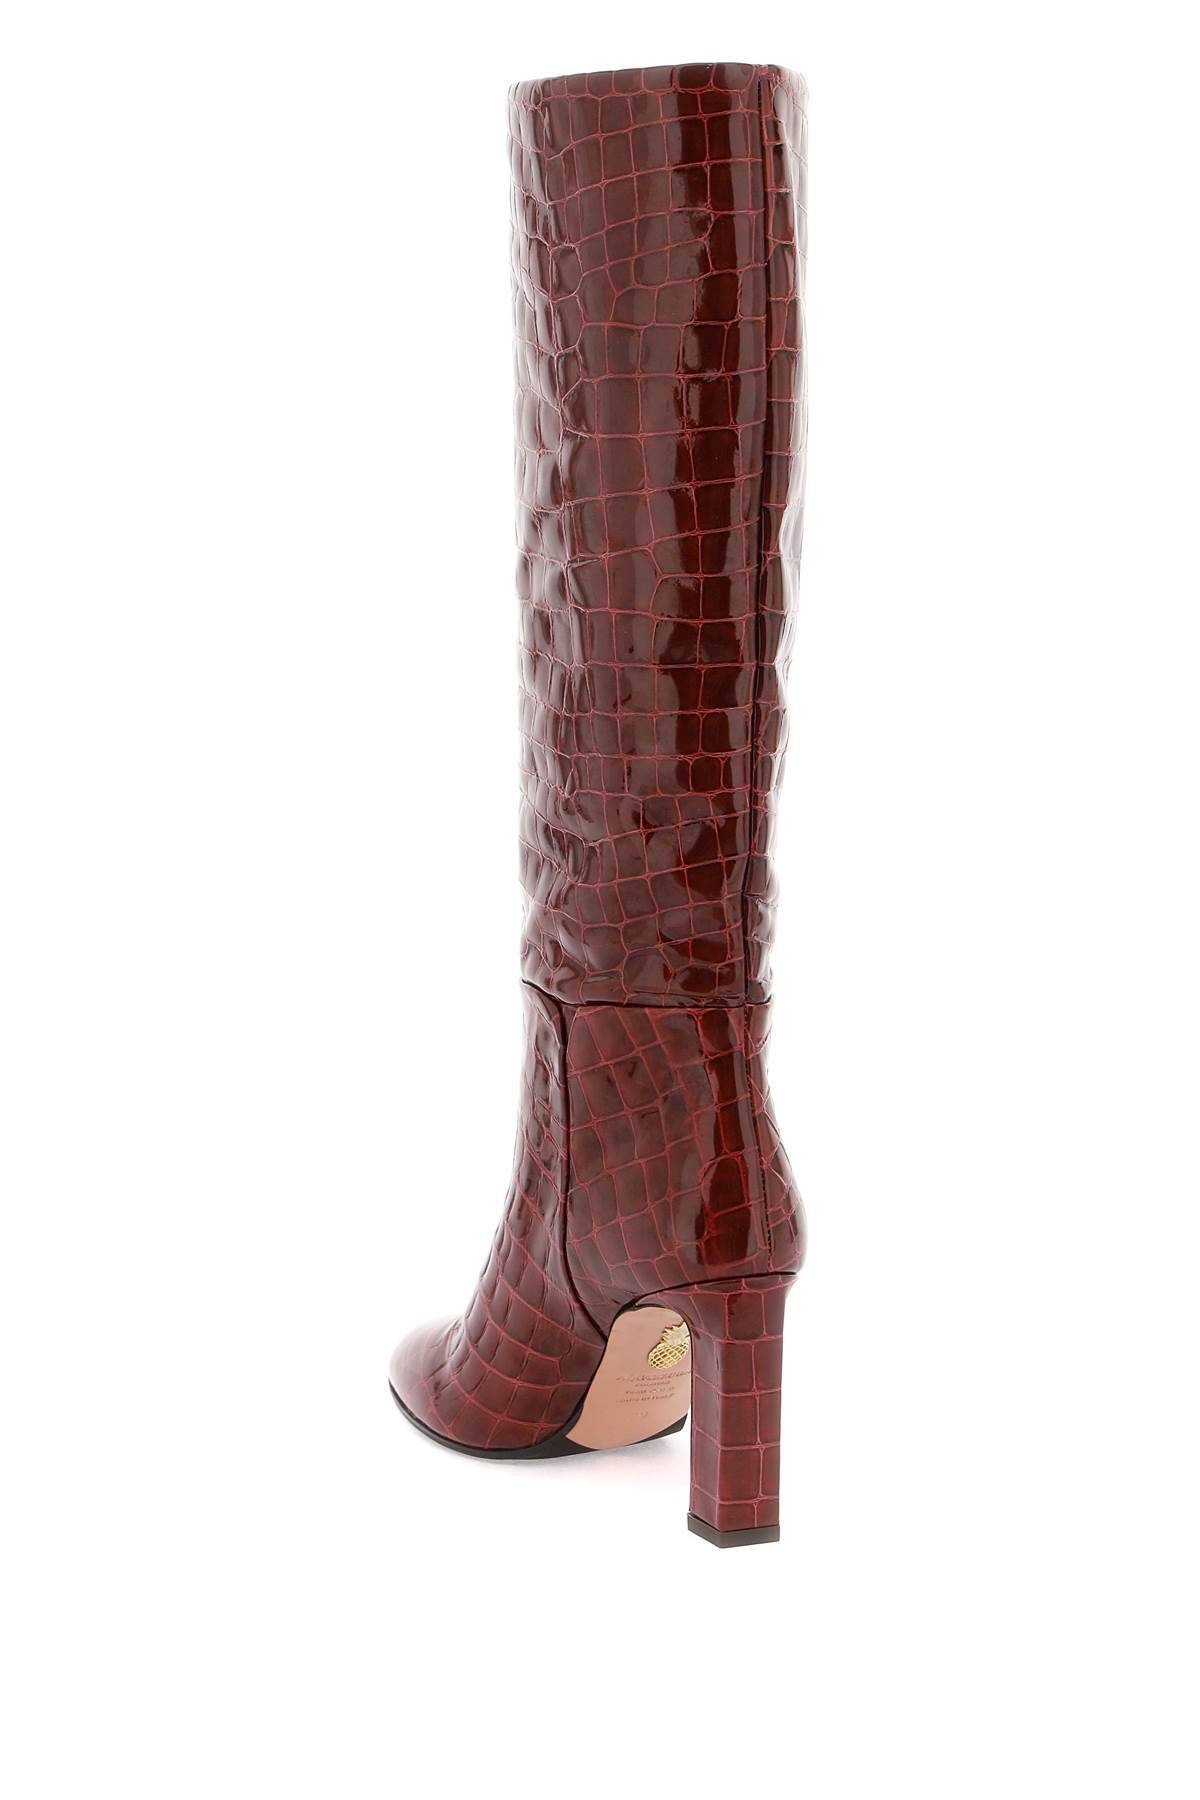 SELLIER BOOTS IN CROC-EMBOSSED LEATHER - 2